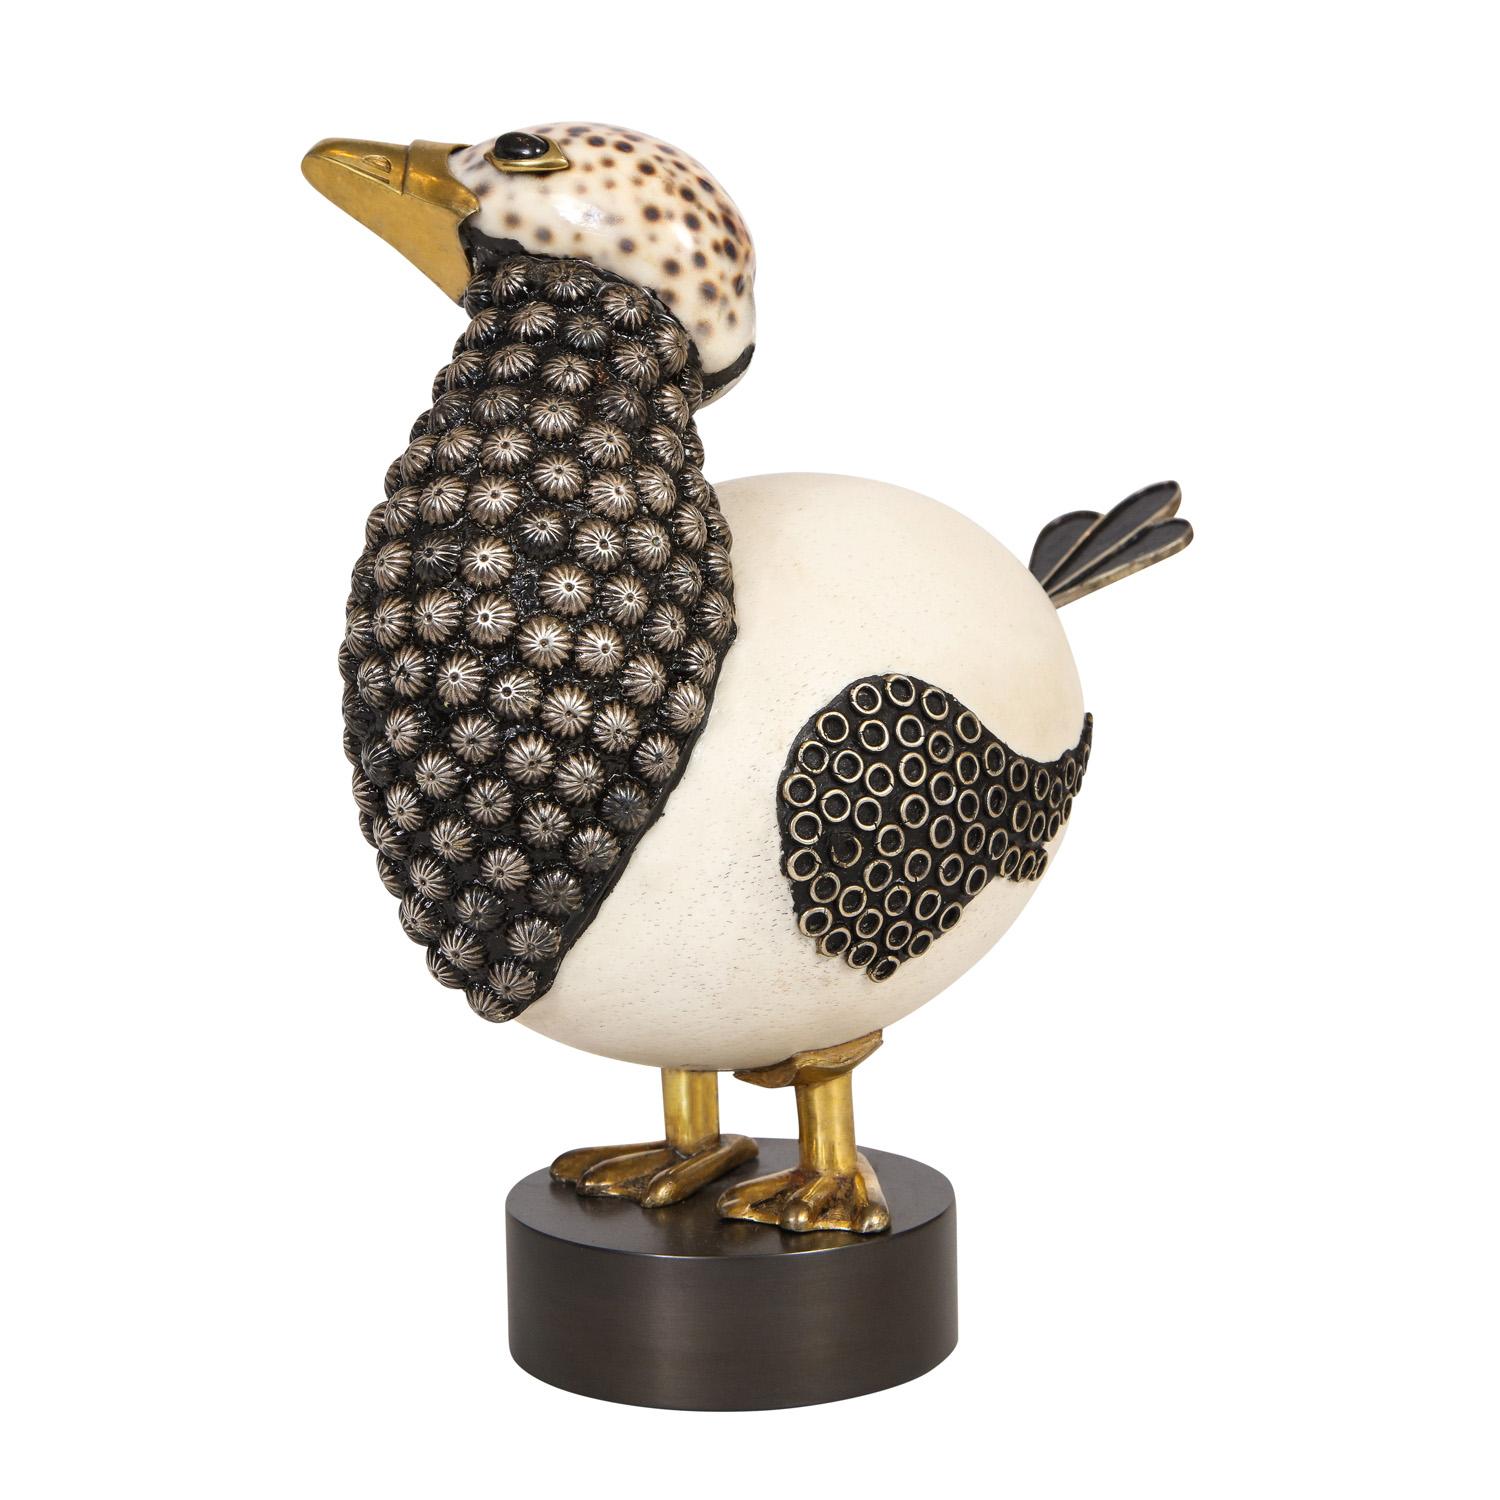 Original bird sculpture in etched pewter and brass with incorporated ostrich egg and sea shell on a bronze base by Roberto Estevez, American 1968 (signed “Estevez 68” on bottom). This is a unique sculpture and showcases the artisanship and intricacy